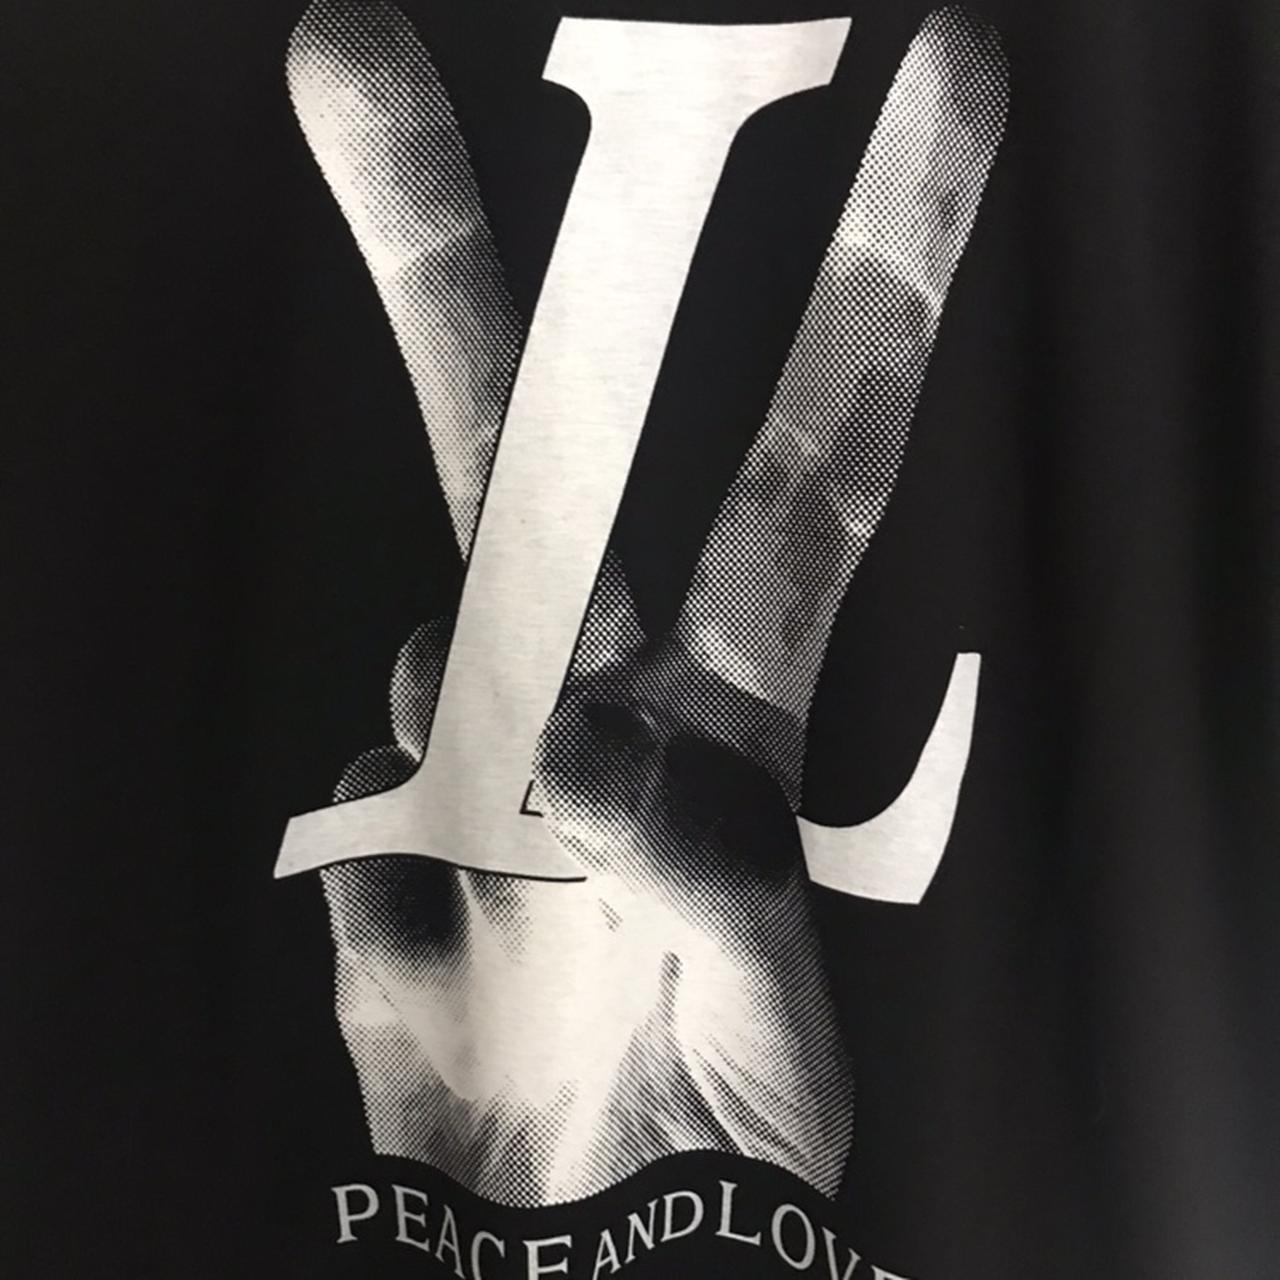 Louis Vuitton peace and love t shirt , Brand new